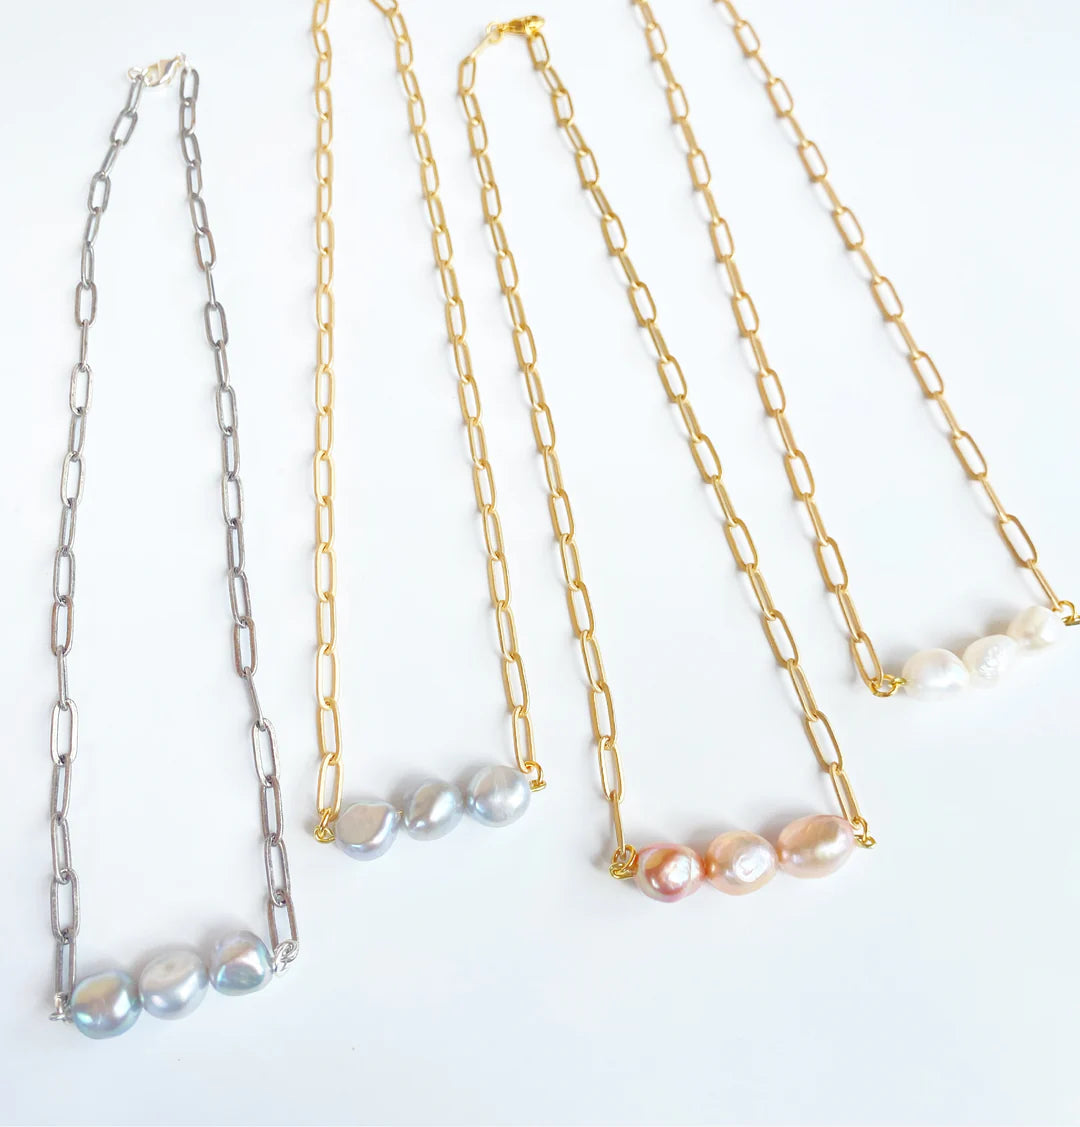 15” Large Paperclip Chain w/ Triple Pearl Connector, 2 colors available